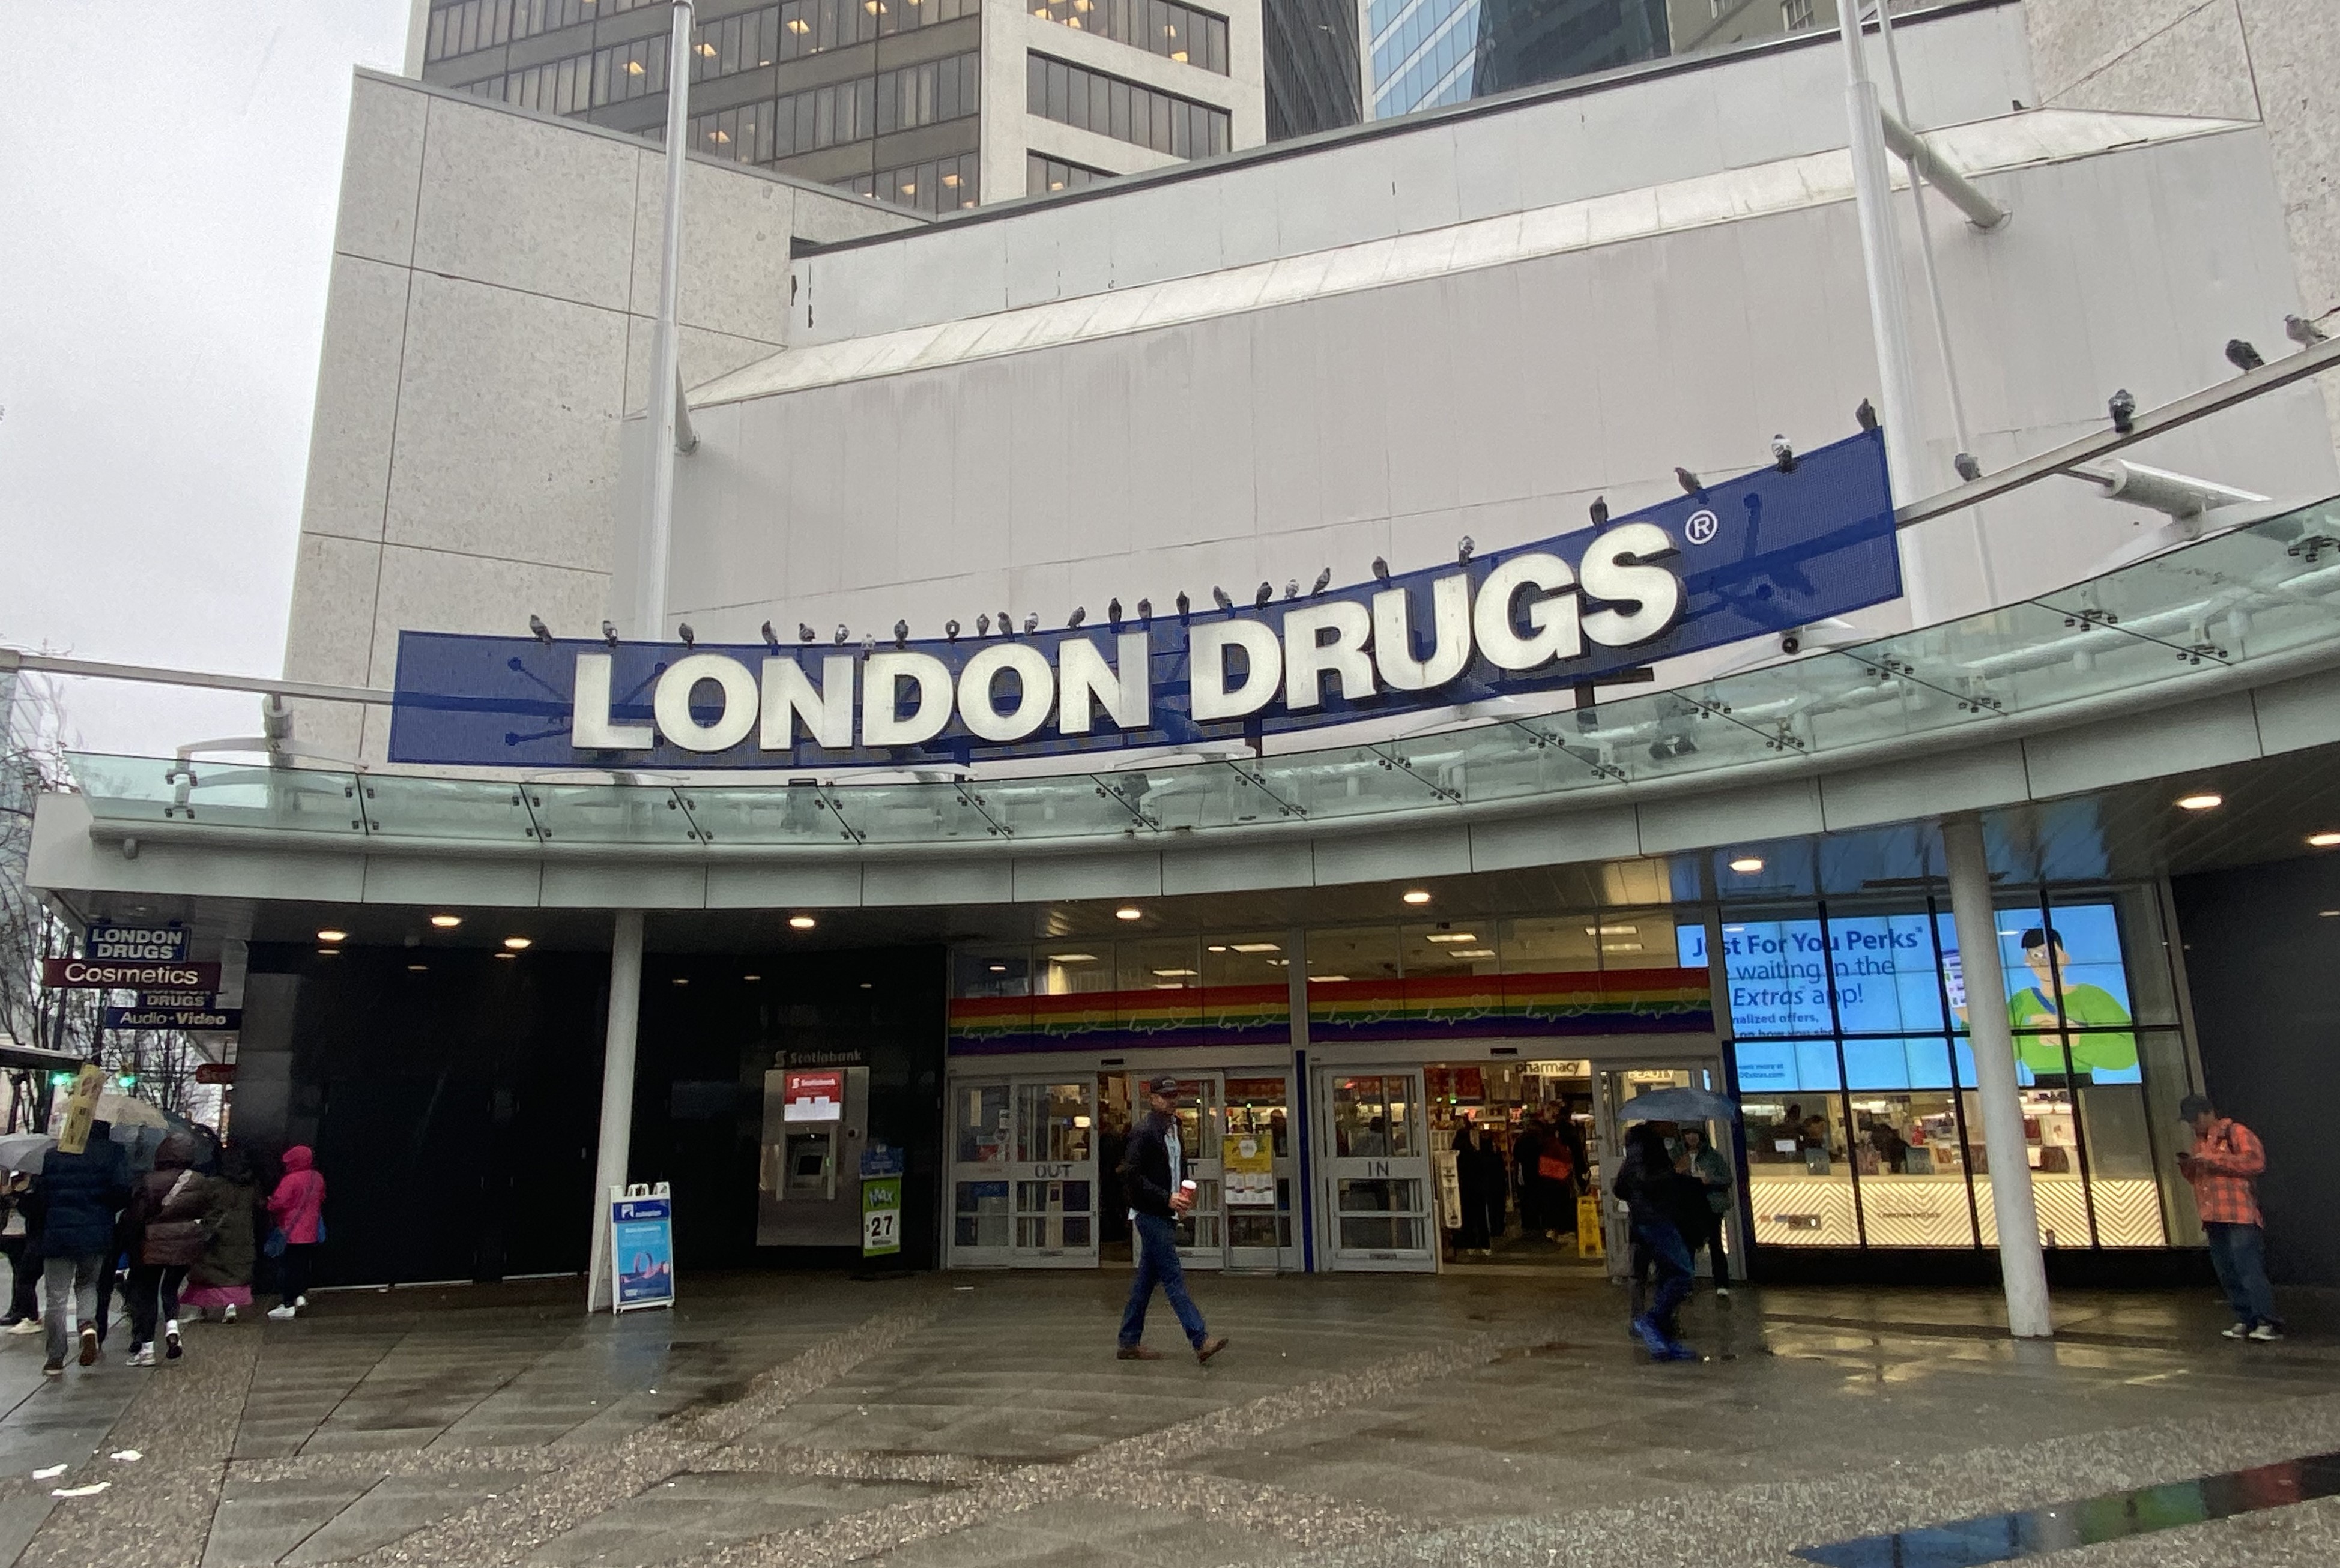 London Drugs not considering store closures due to escalating